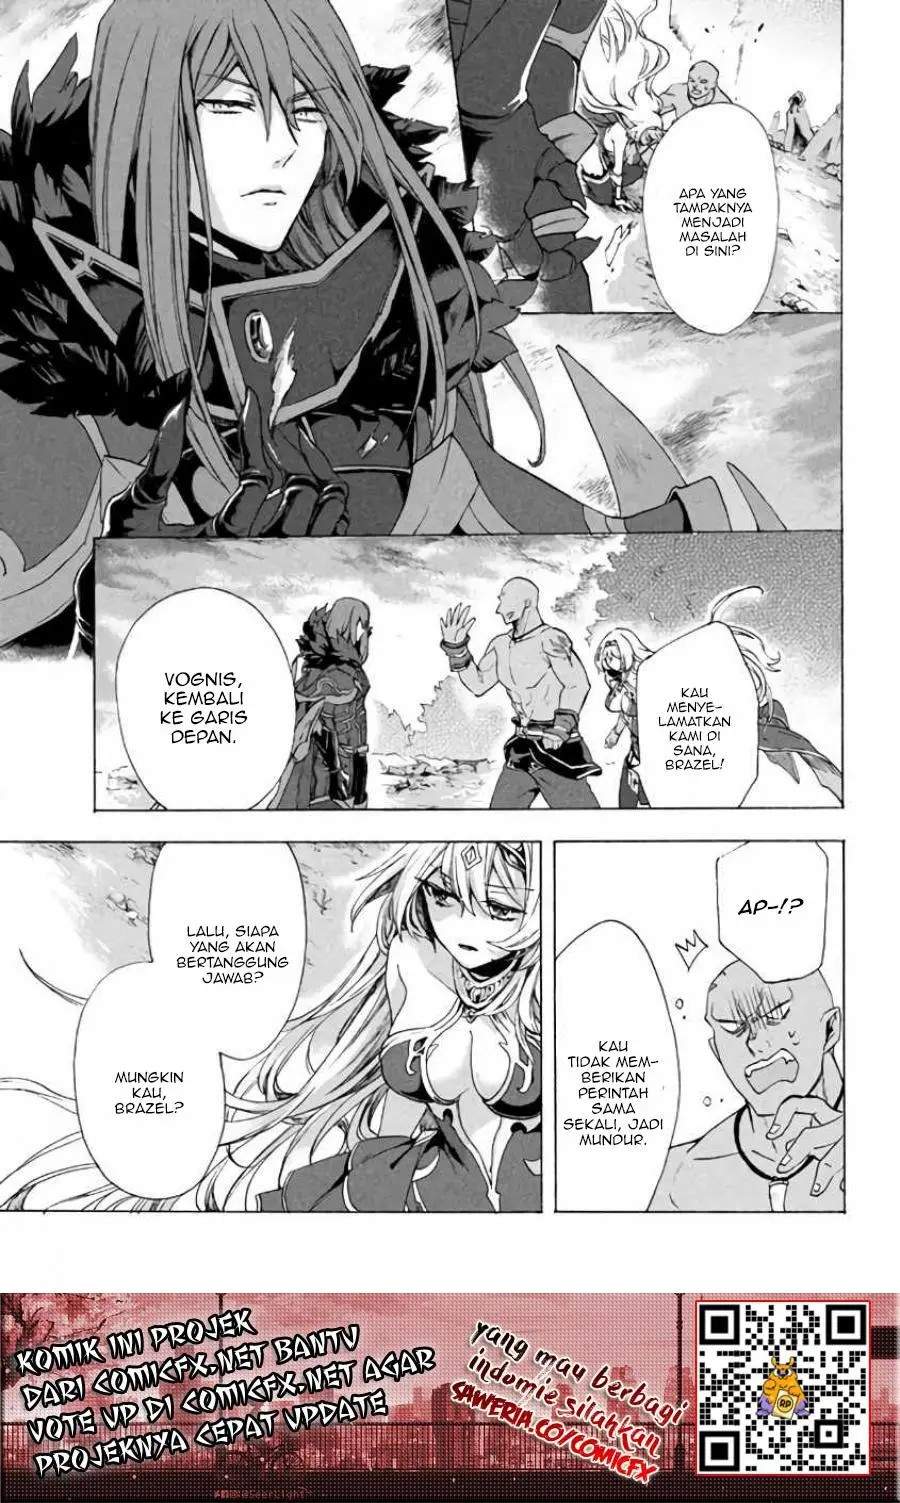 “Kukuku ……. He is the weakest of the Four Heavenly Monarchs.” I was dismissed from my job, but somehow I became the master of a hero and a holy maiden. Chapter 3.2